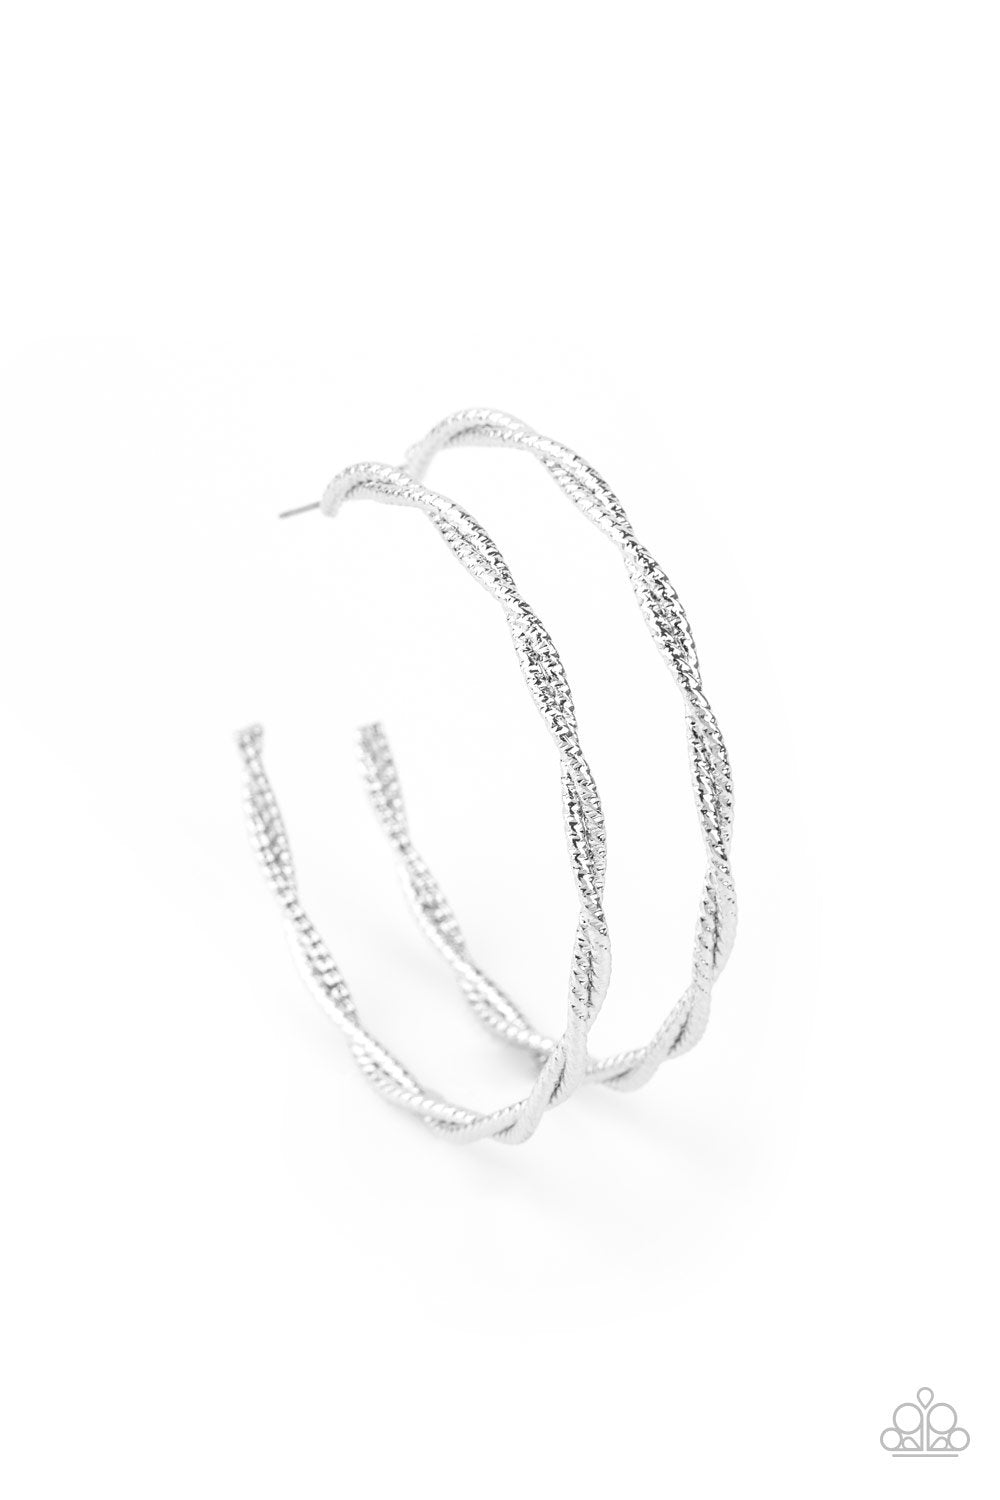 Totally Throttled Silver Hoop Earrings - Paparazzi Accessories - lightbox -CarasShop.com - $5 Jewelry by Cara Jewels